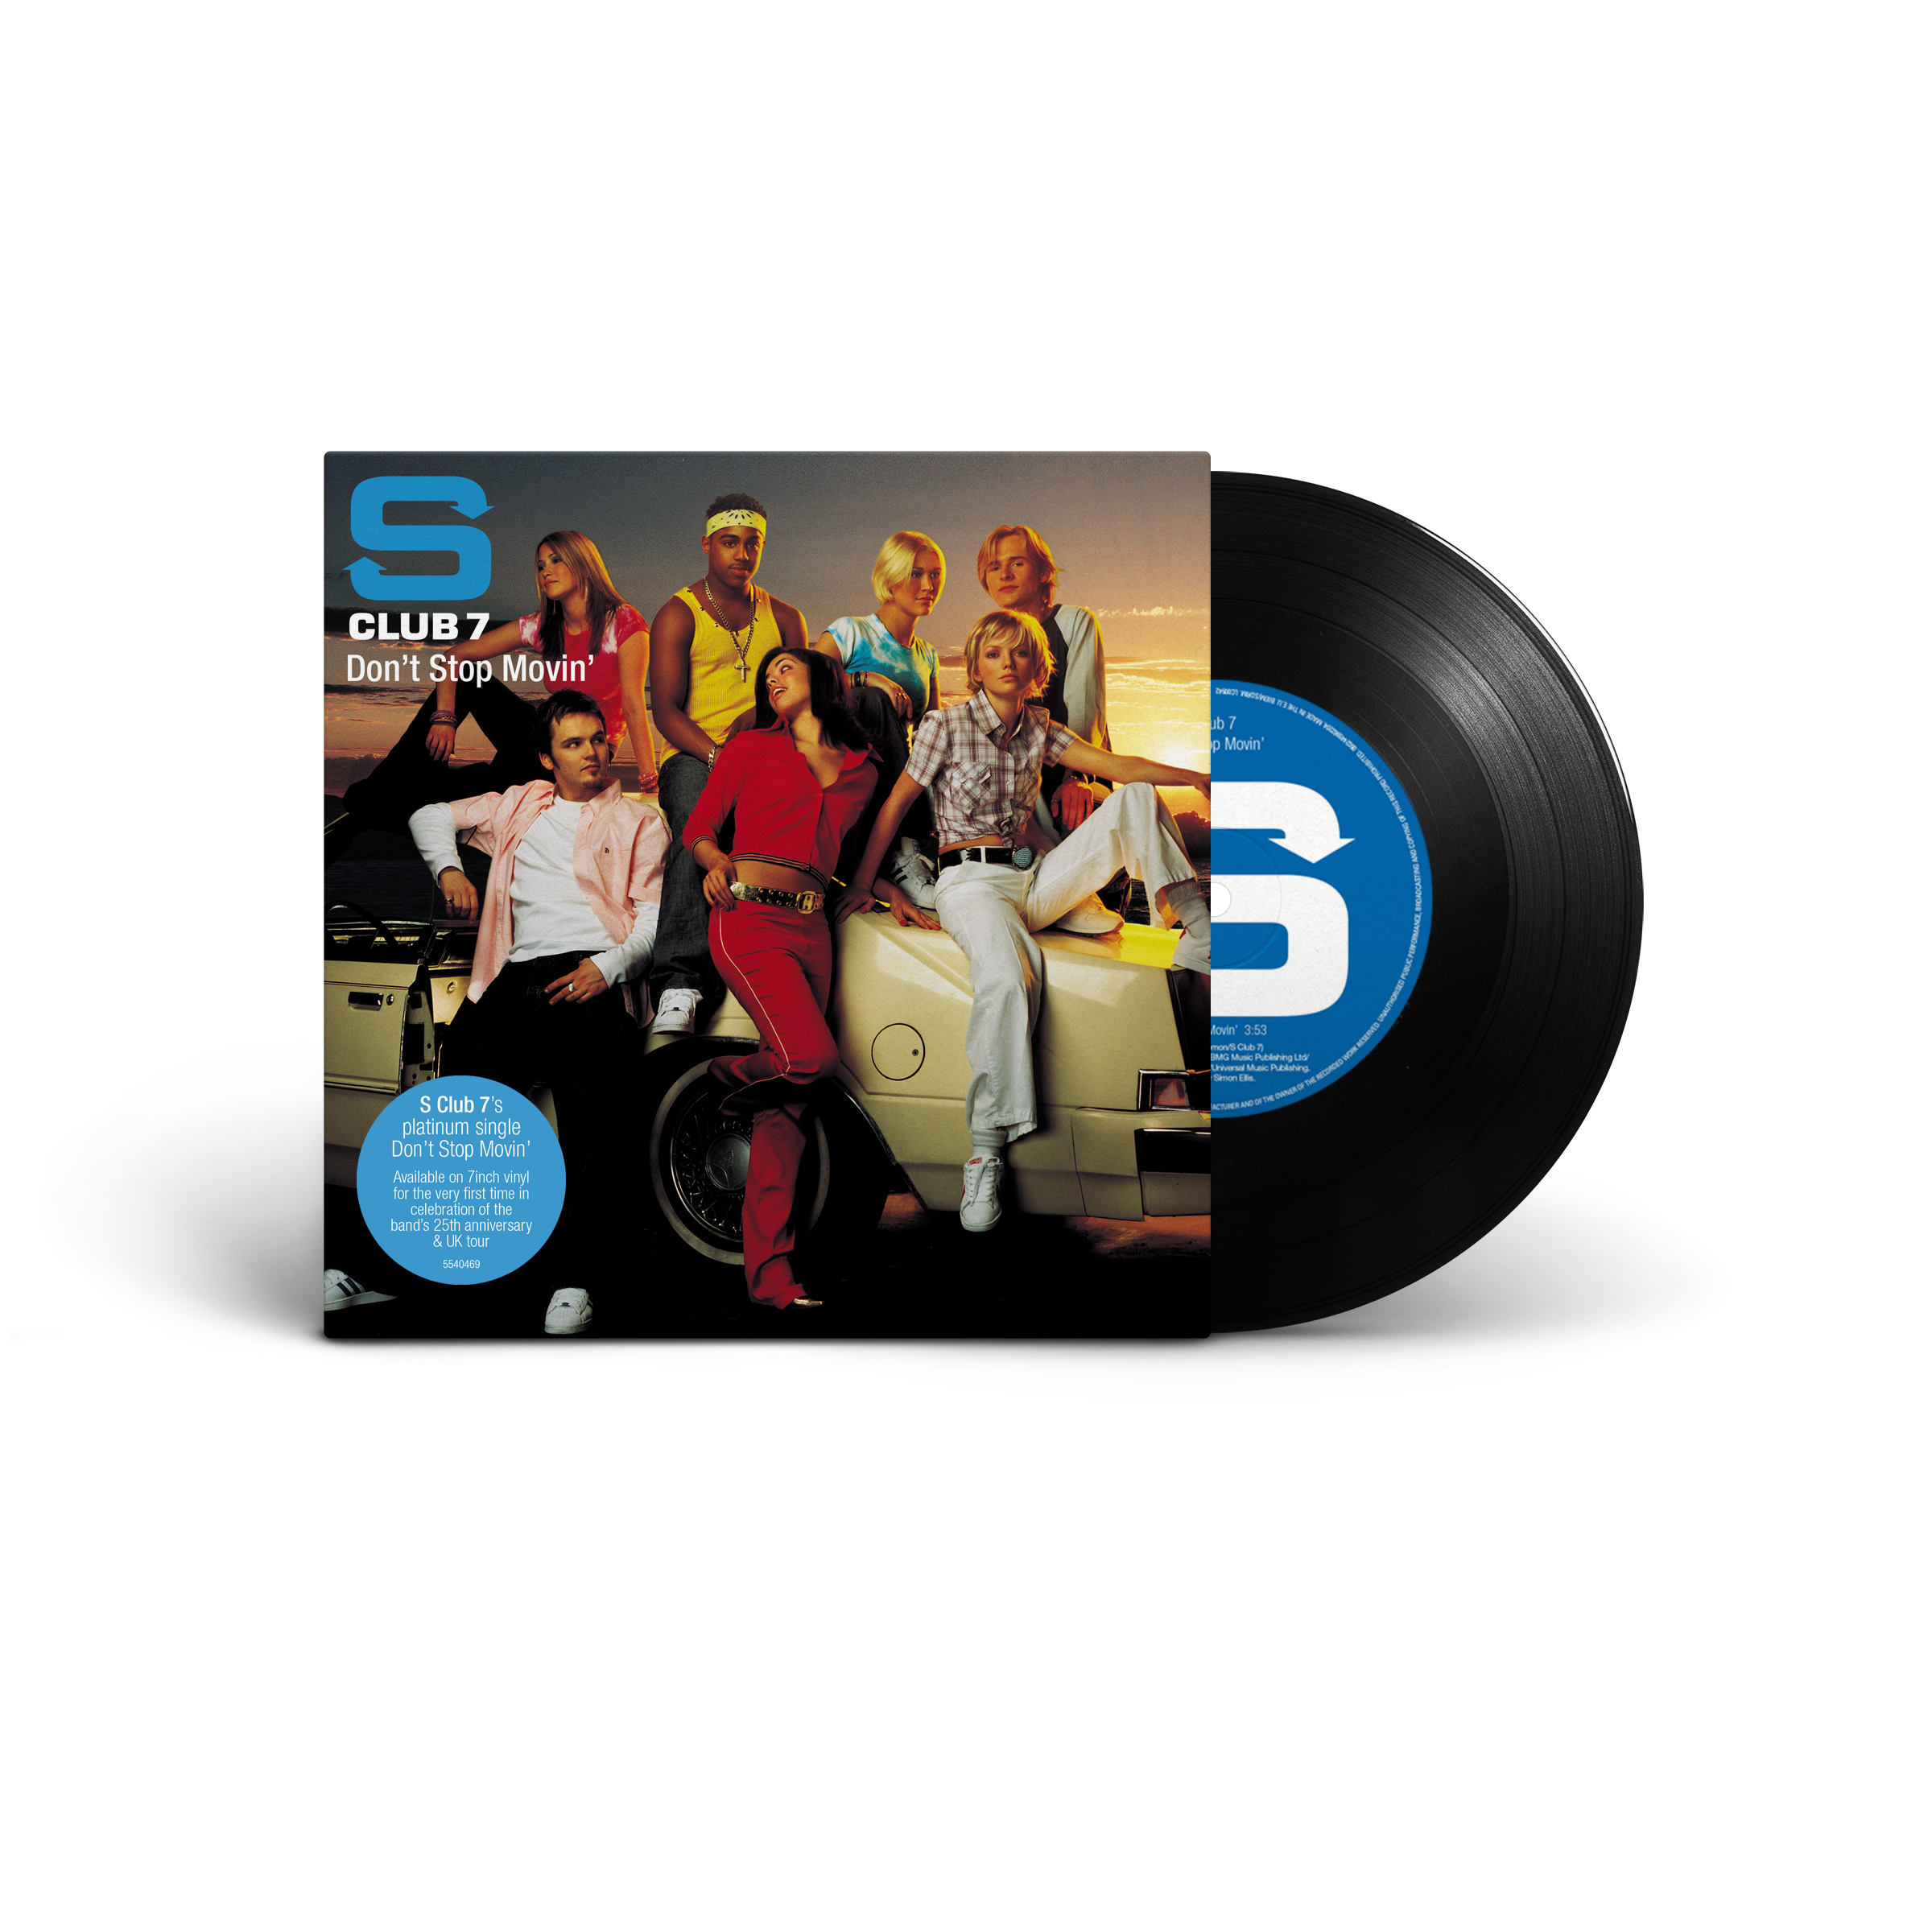 Don't Stop Movin' (D2C Exclusive 7”) With limited-edition Art Card